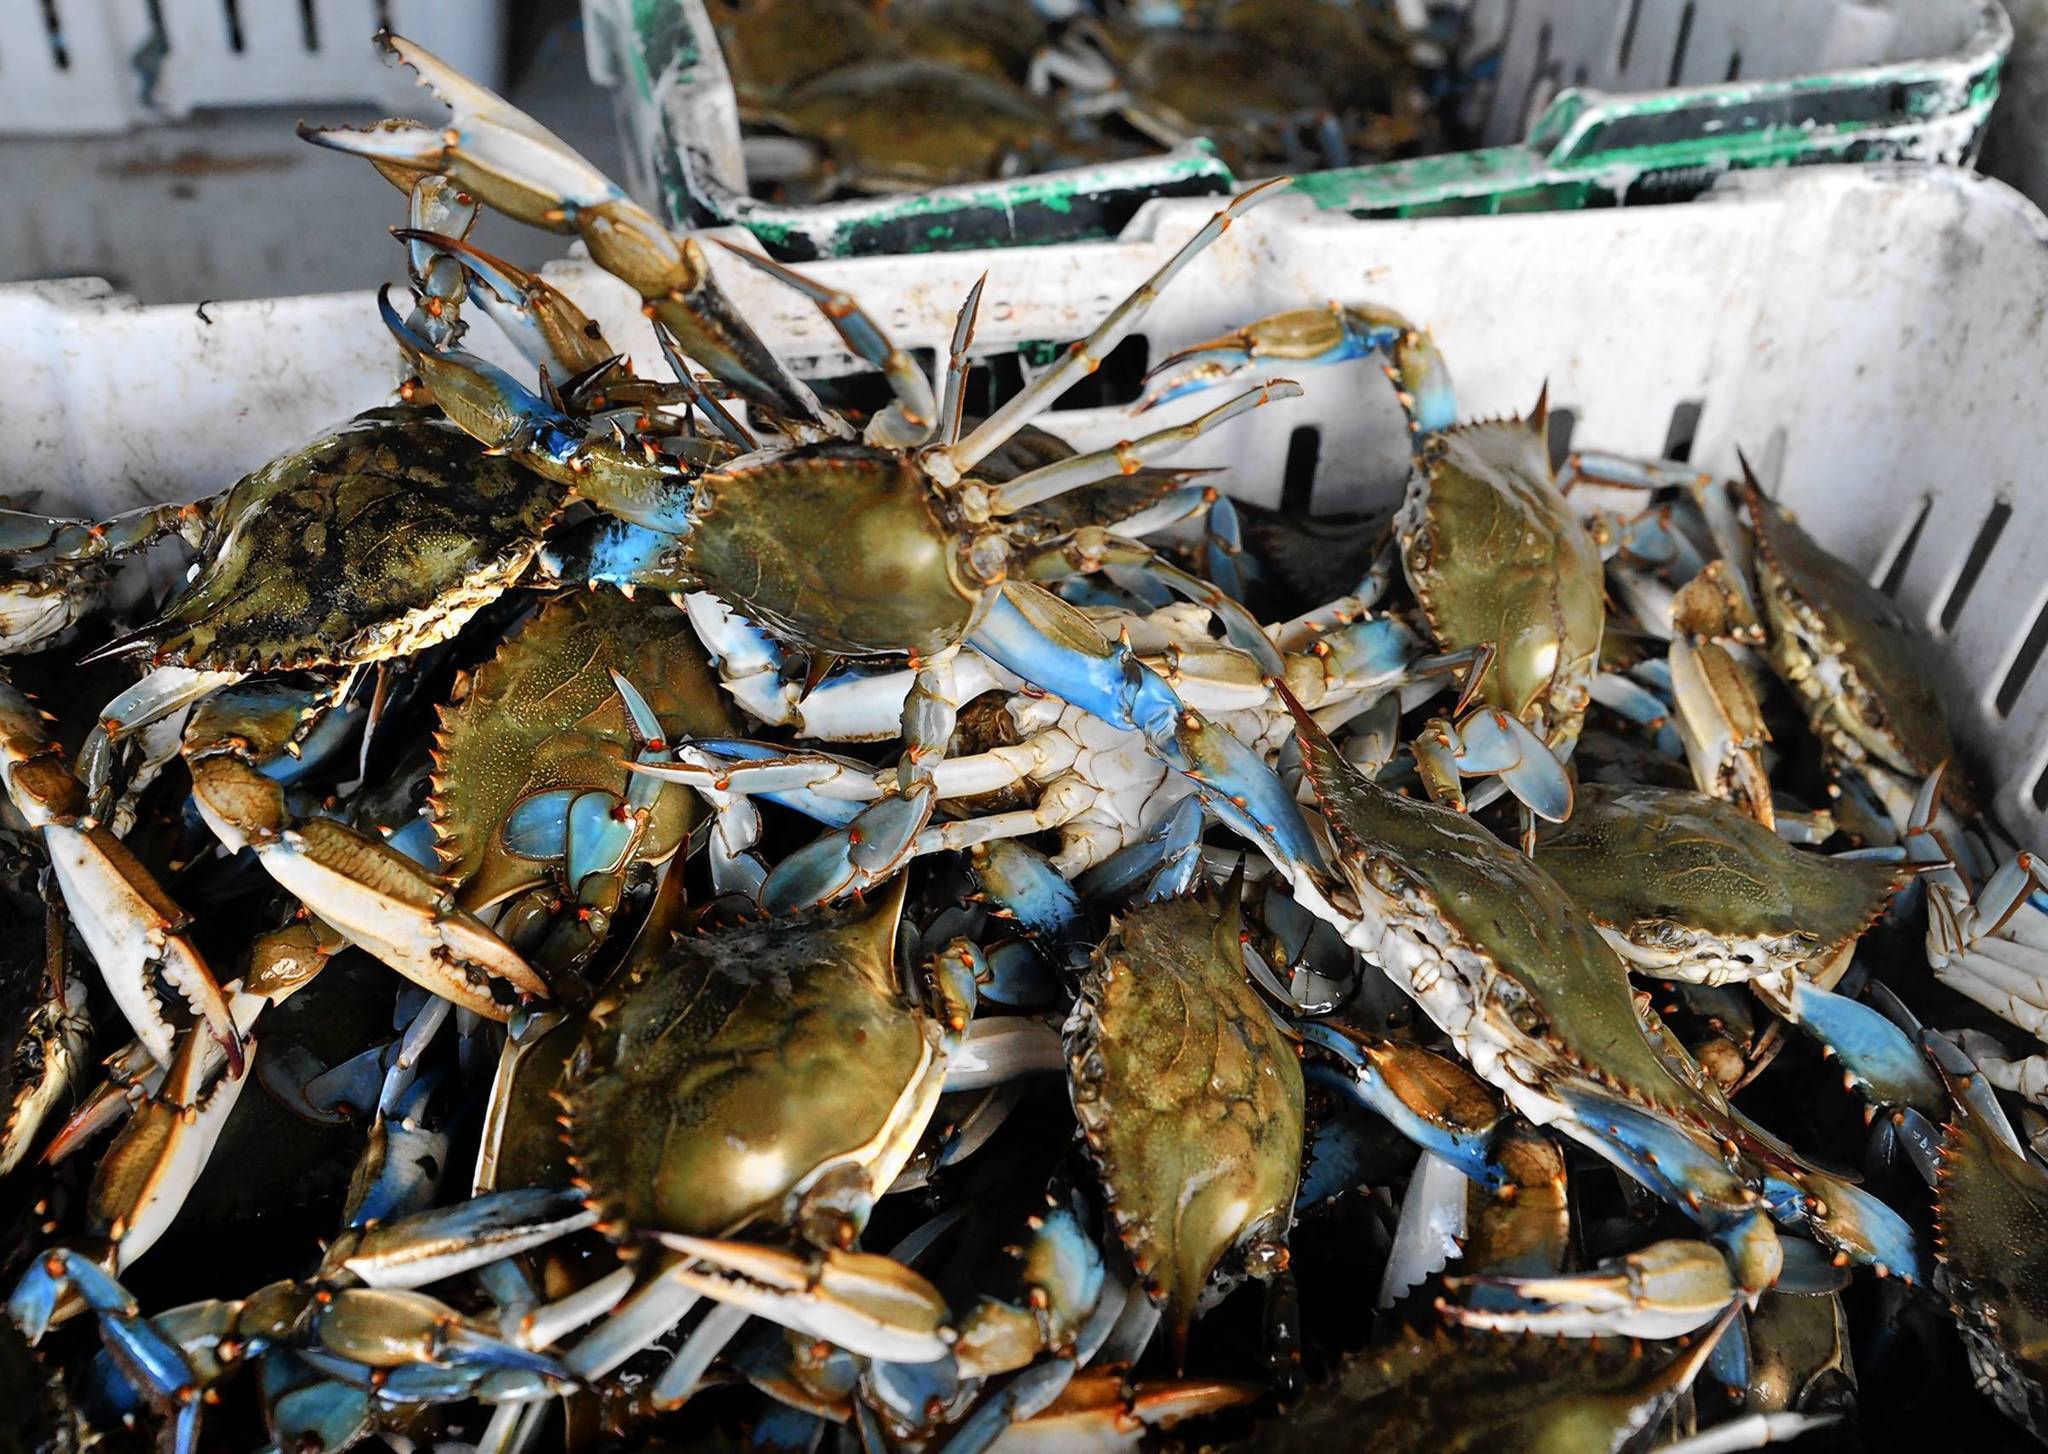 Crabs 101 | A guide to cooking, eating and enjoying Maryland crabs